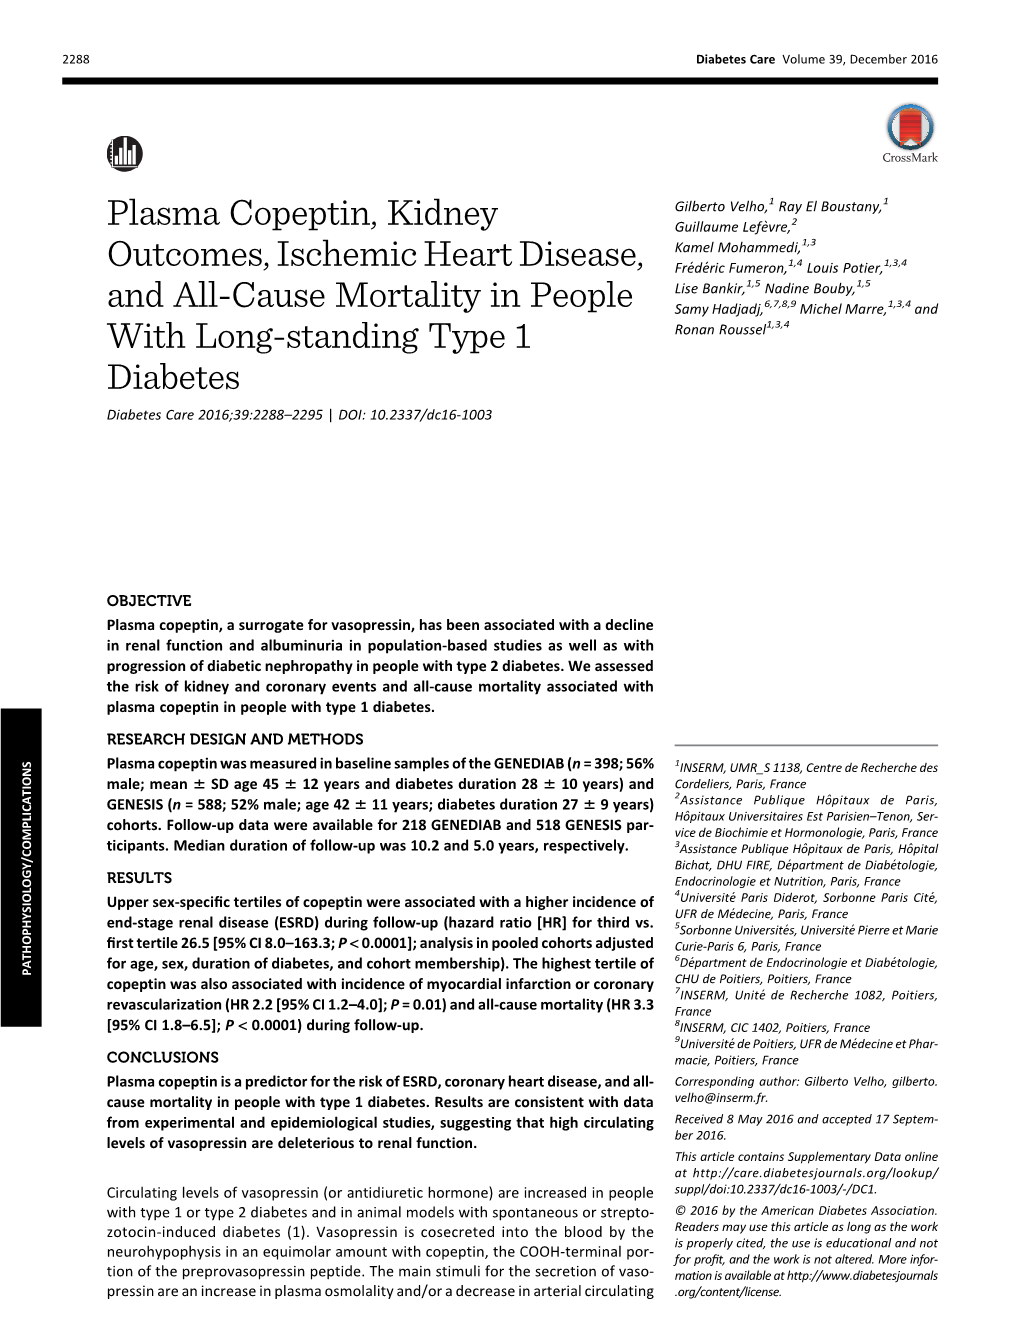 Plasma Copeptin, Kidney Outcomes, Ischemic Heart Disease, and All